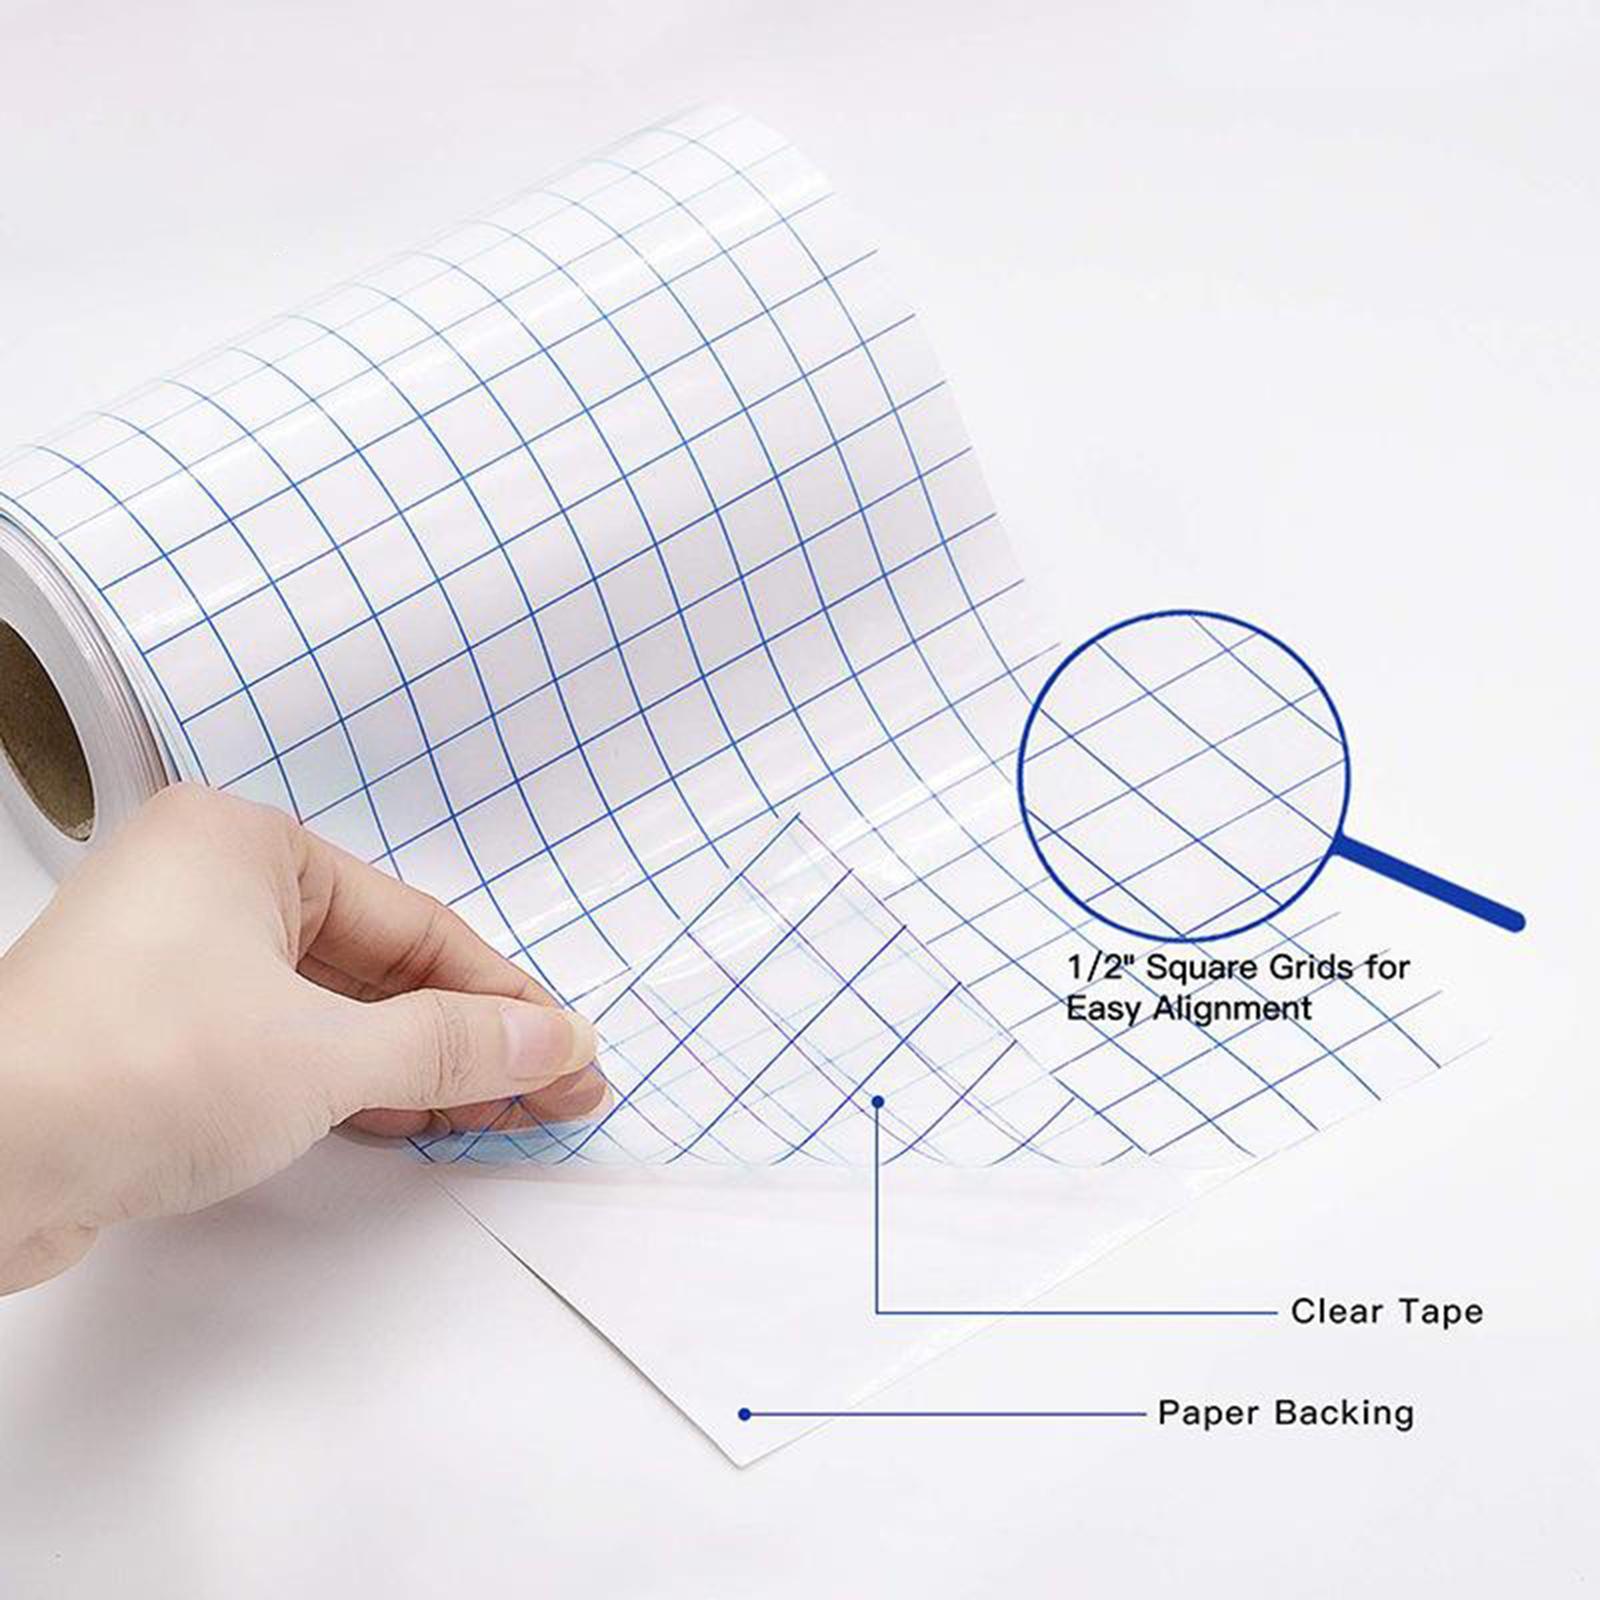 4x Transfer Tape Roll Clear Transfer Paper w/ Alignment